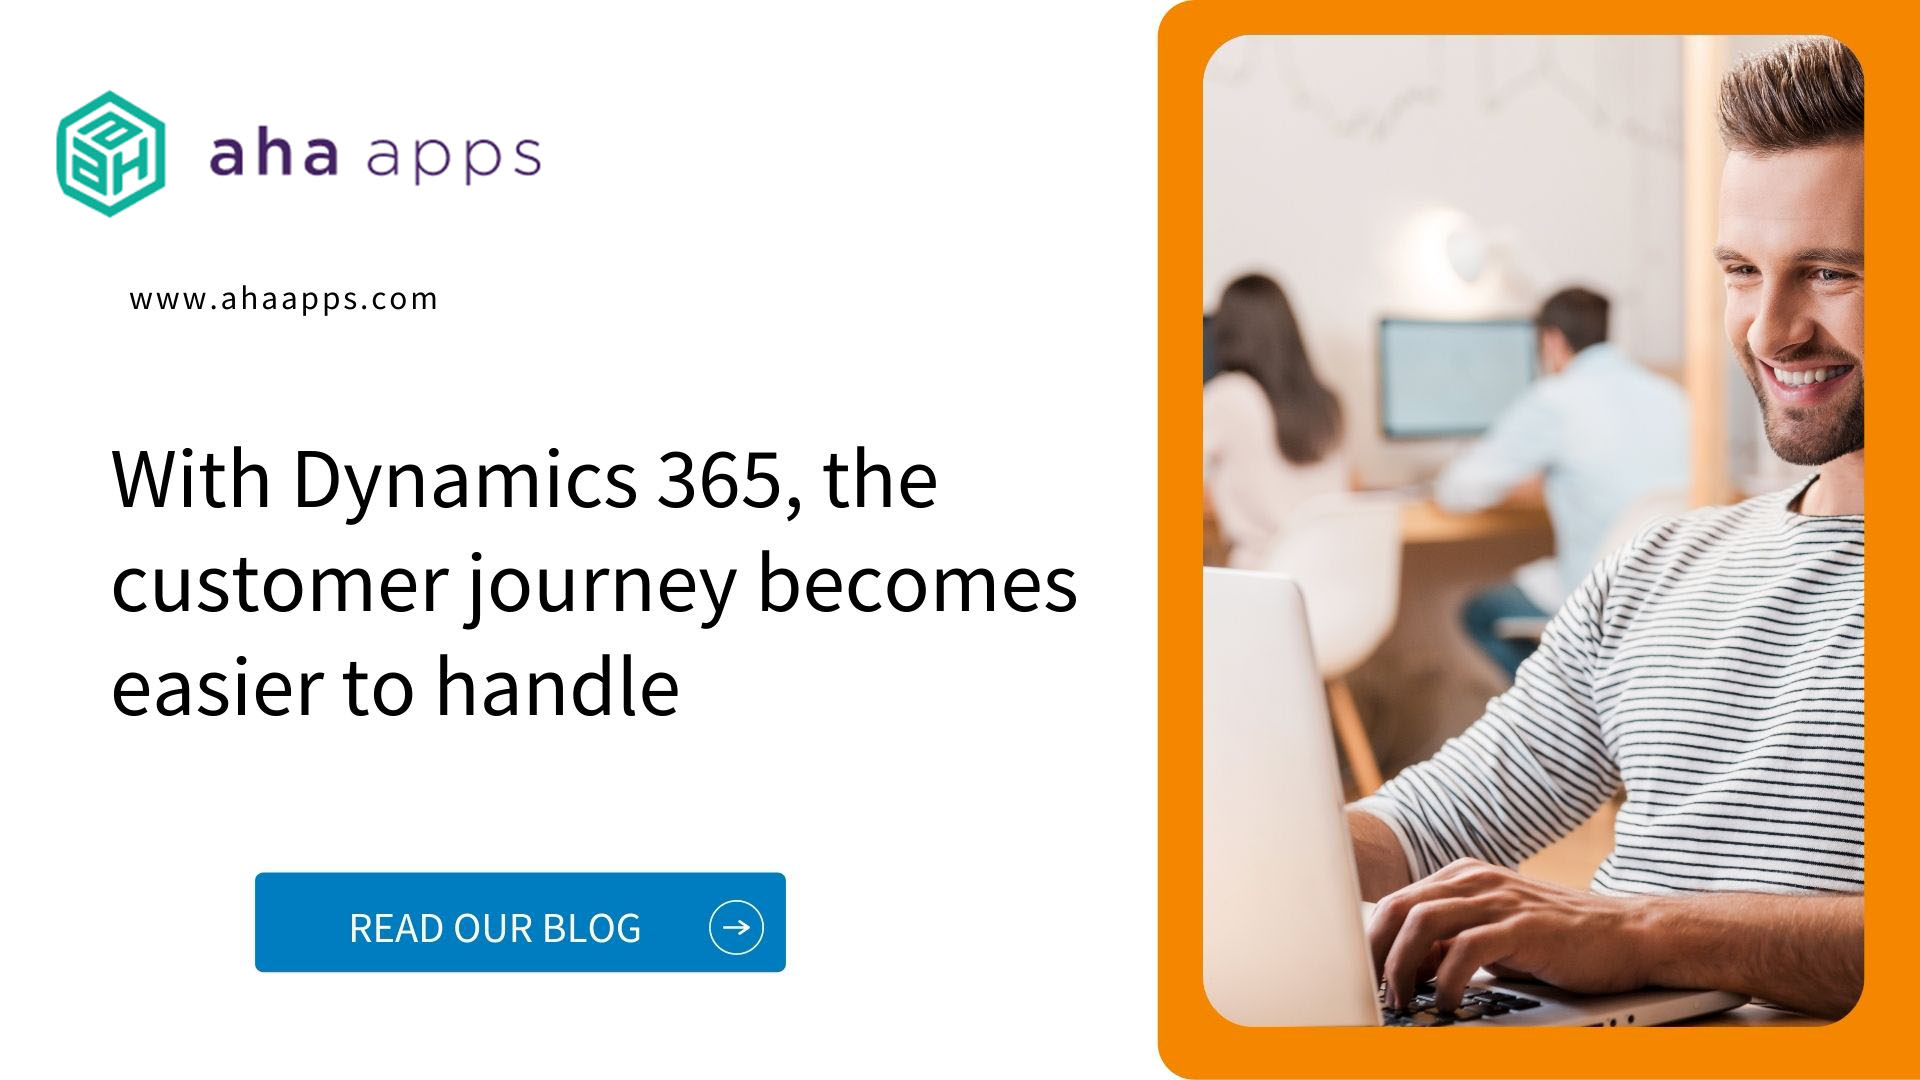 SMB customer’s journey with Microsoft Dynamics 365 - AhaApps